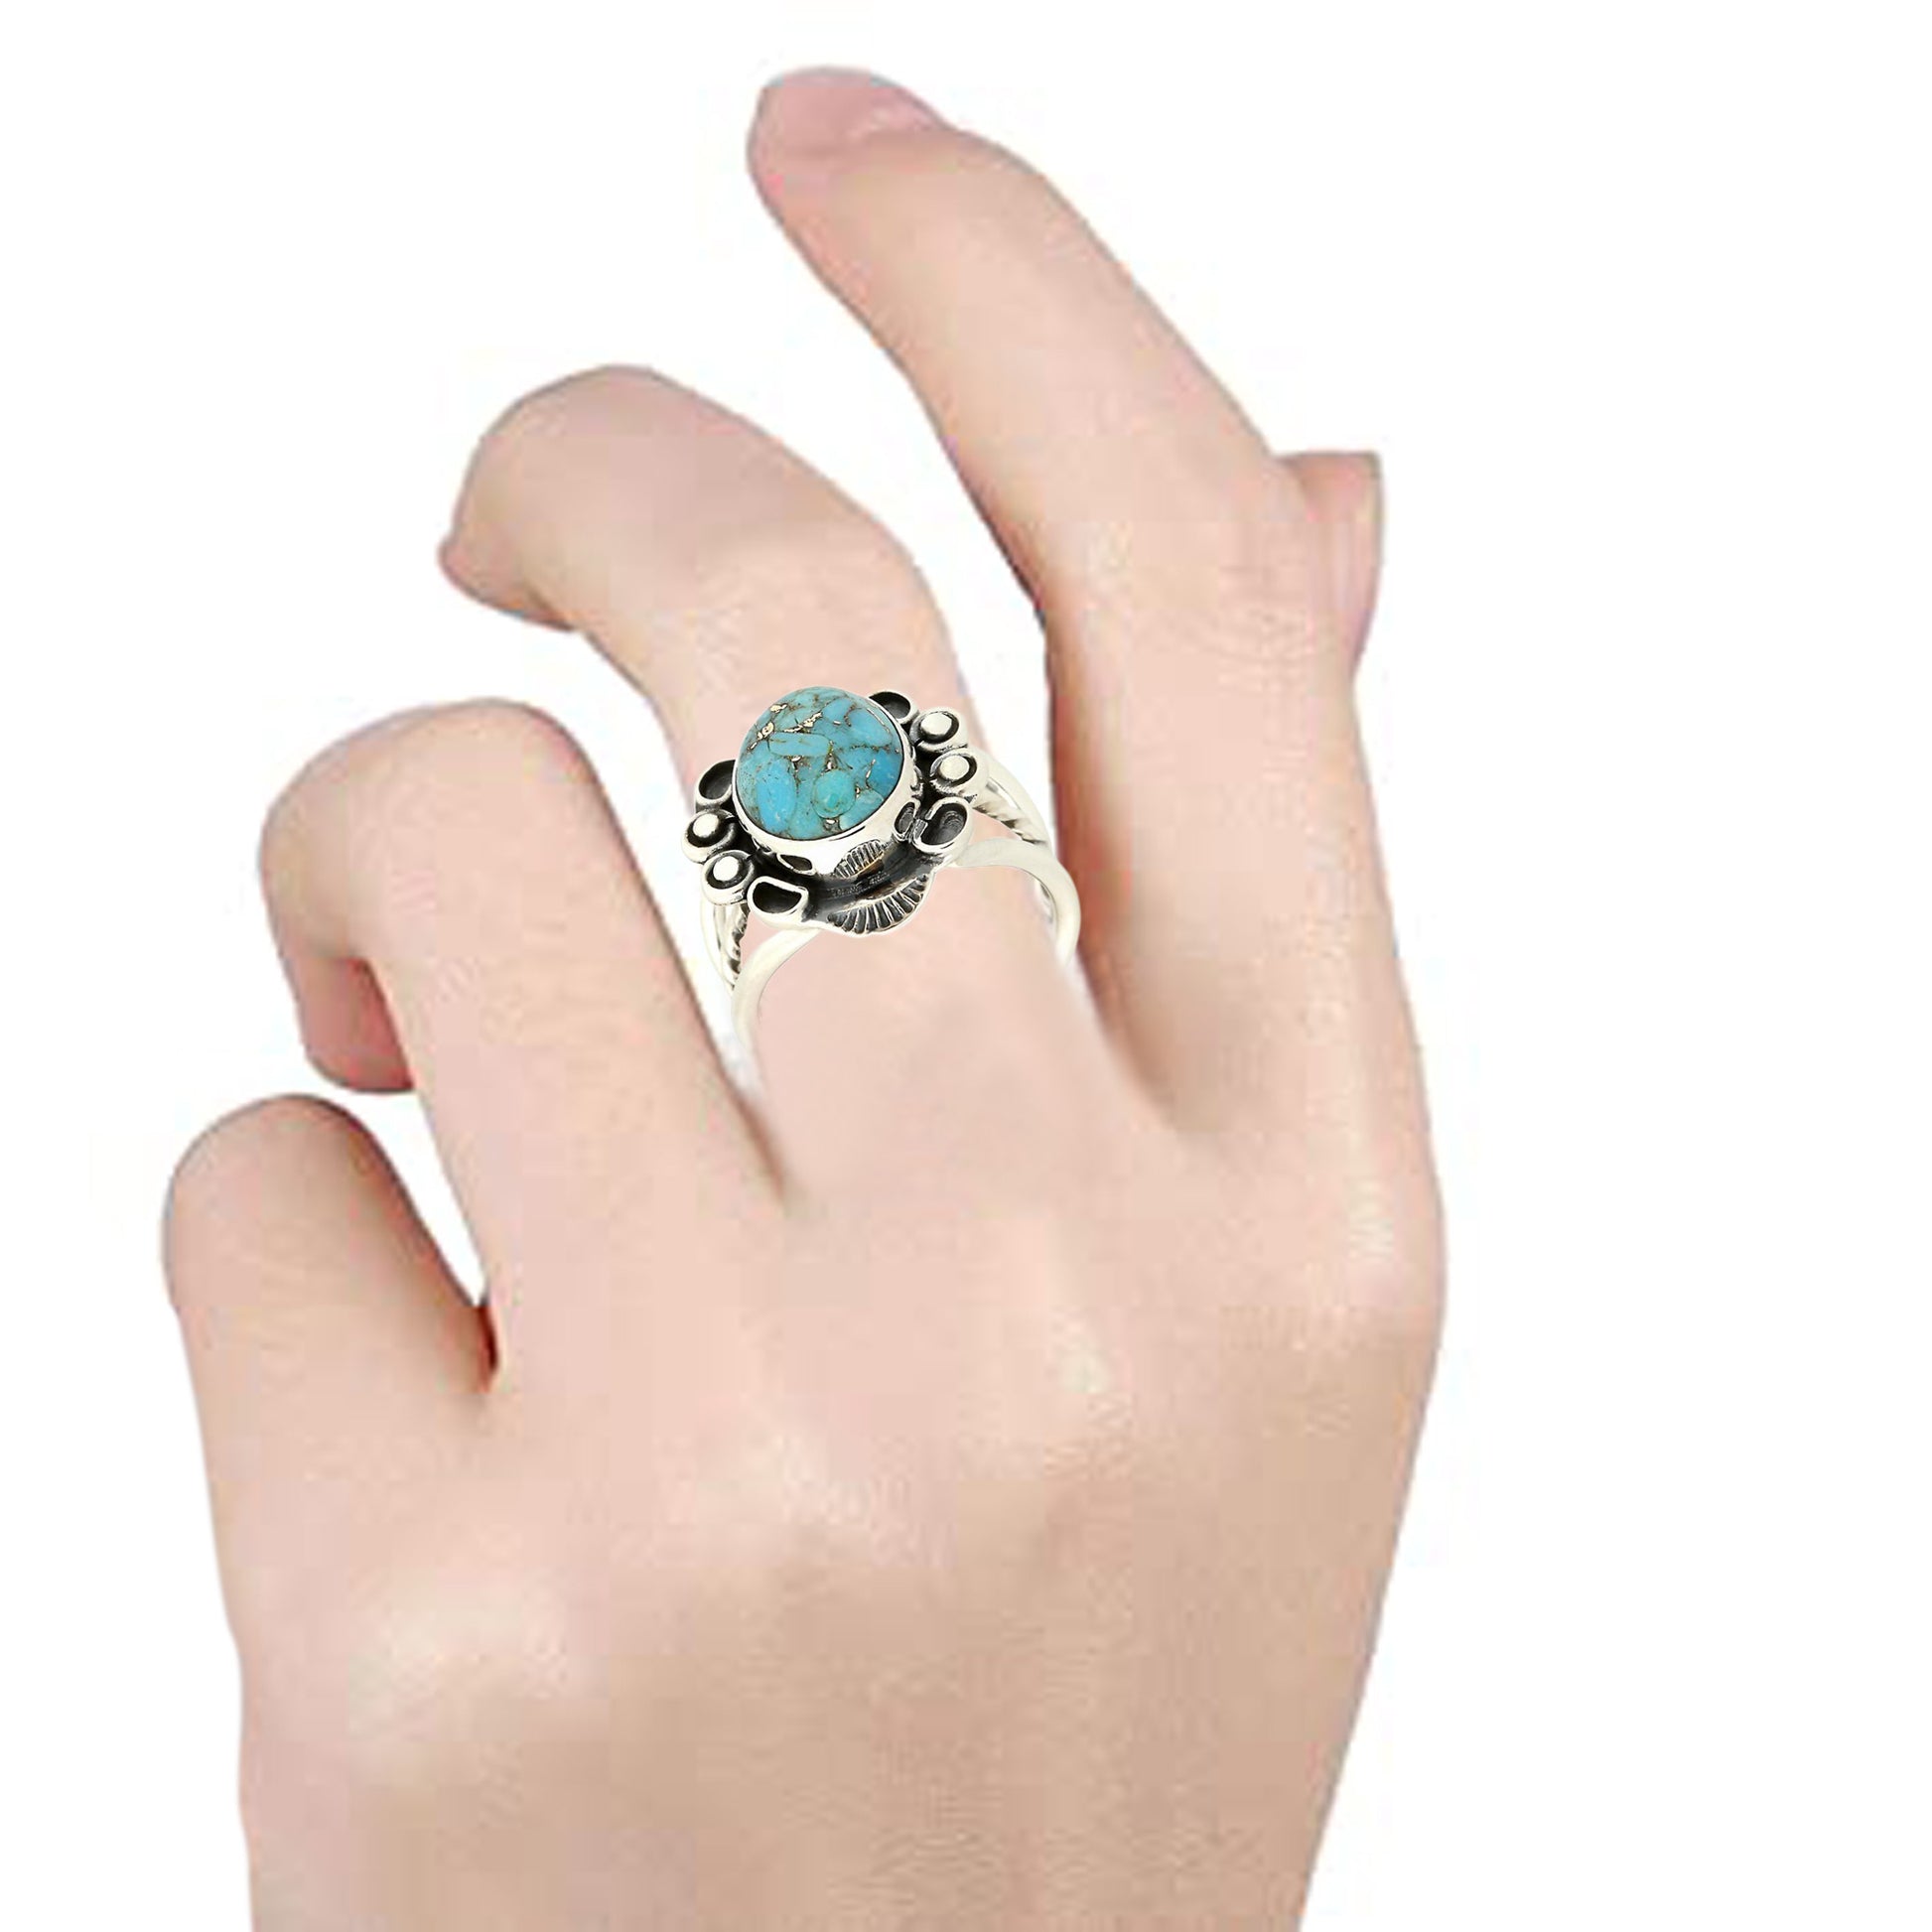 Sterling Silver 925 Blue Copper Turquoise Ring - Pinctore